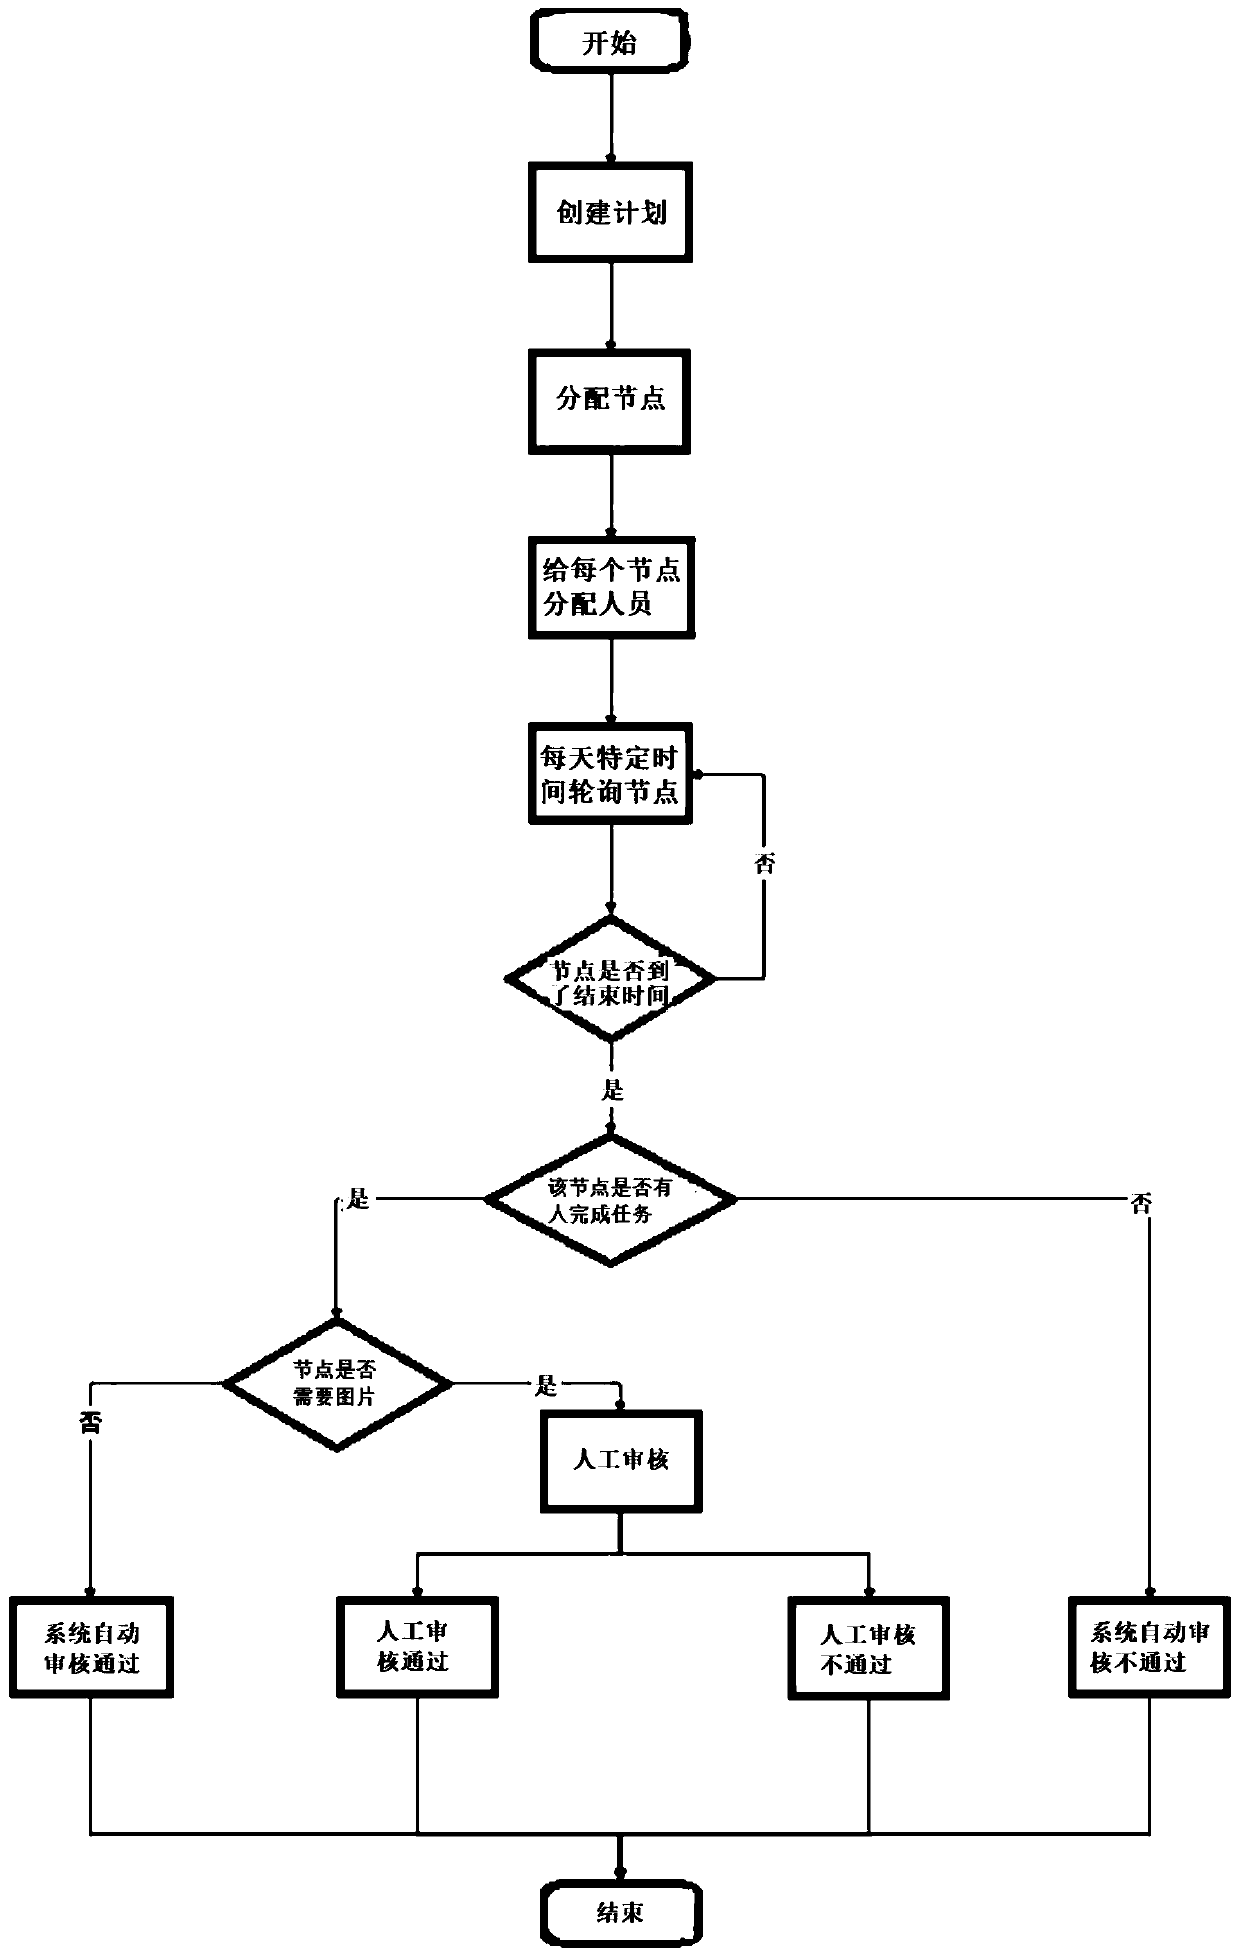 Anti-counterfeiting traceability information processing method and system based on block chain